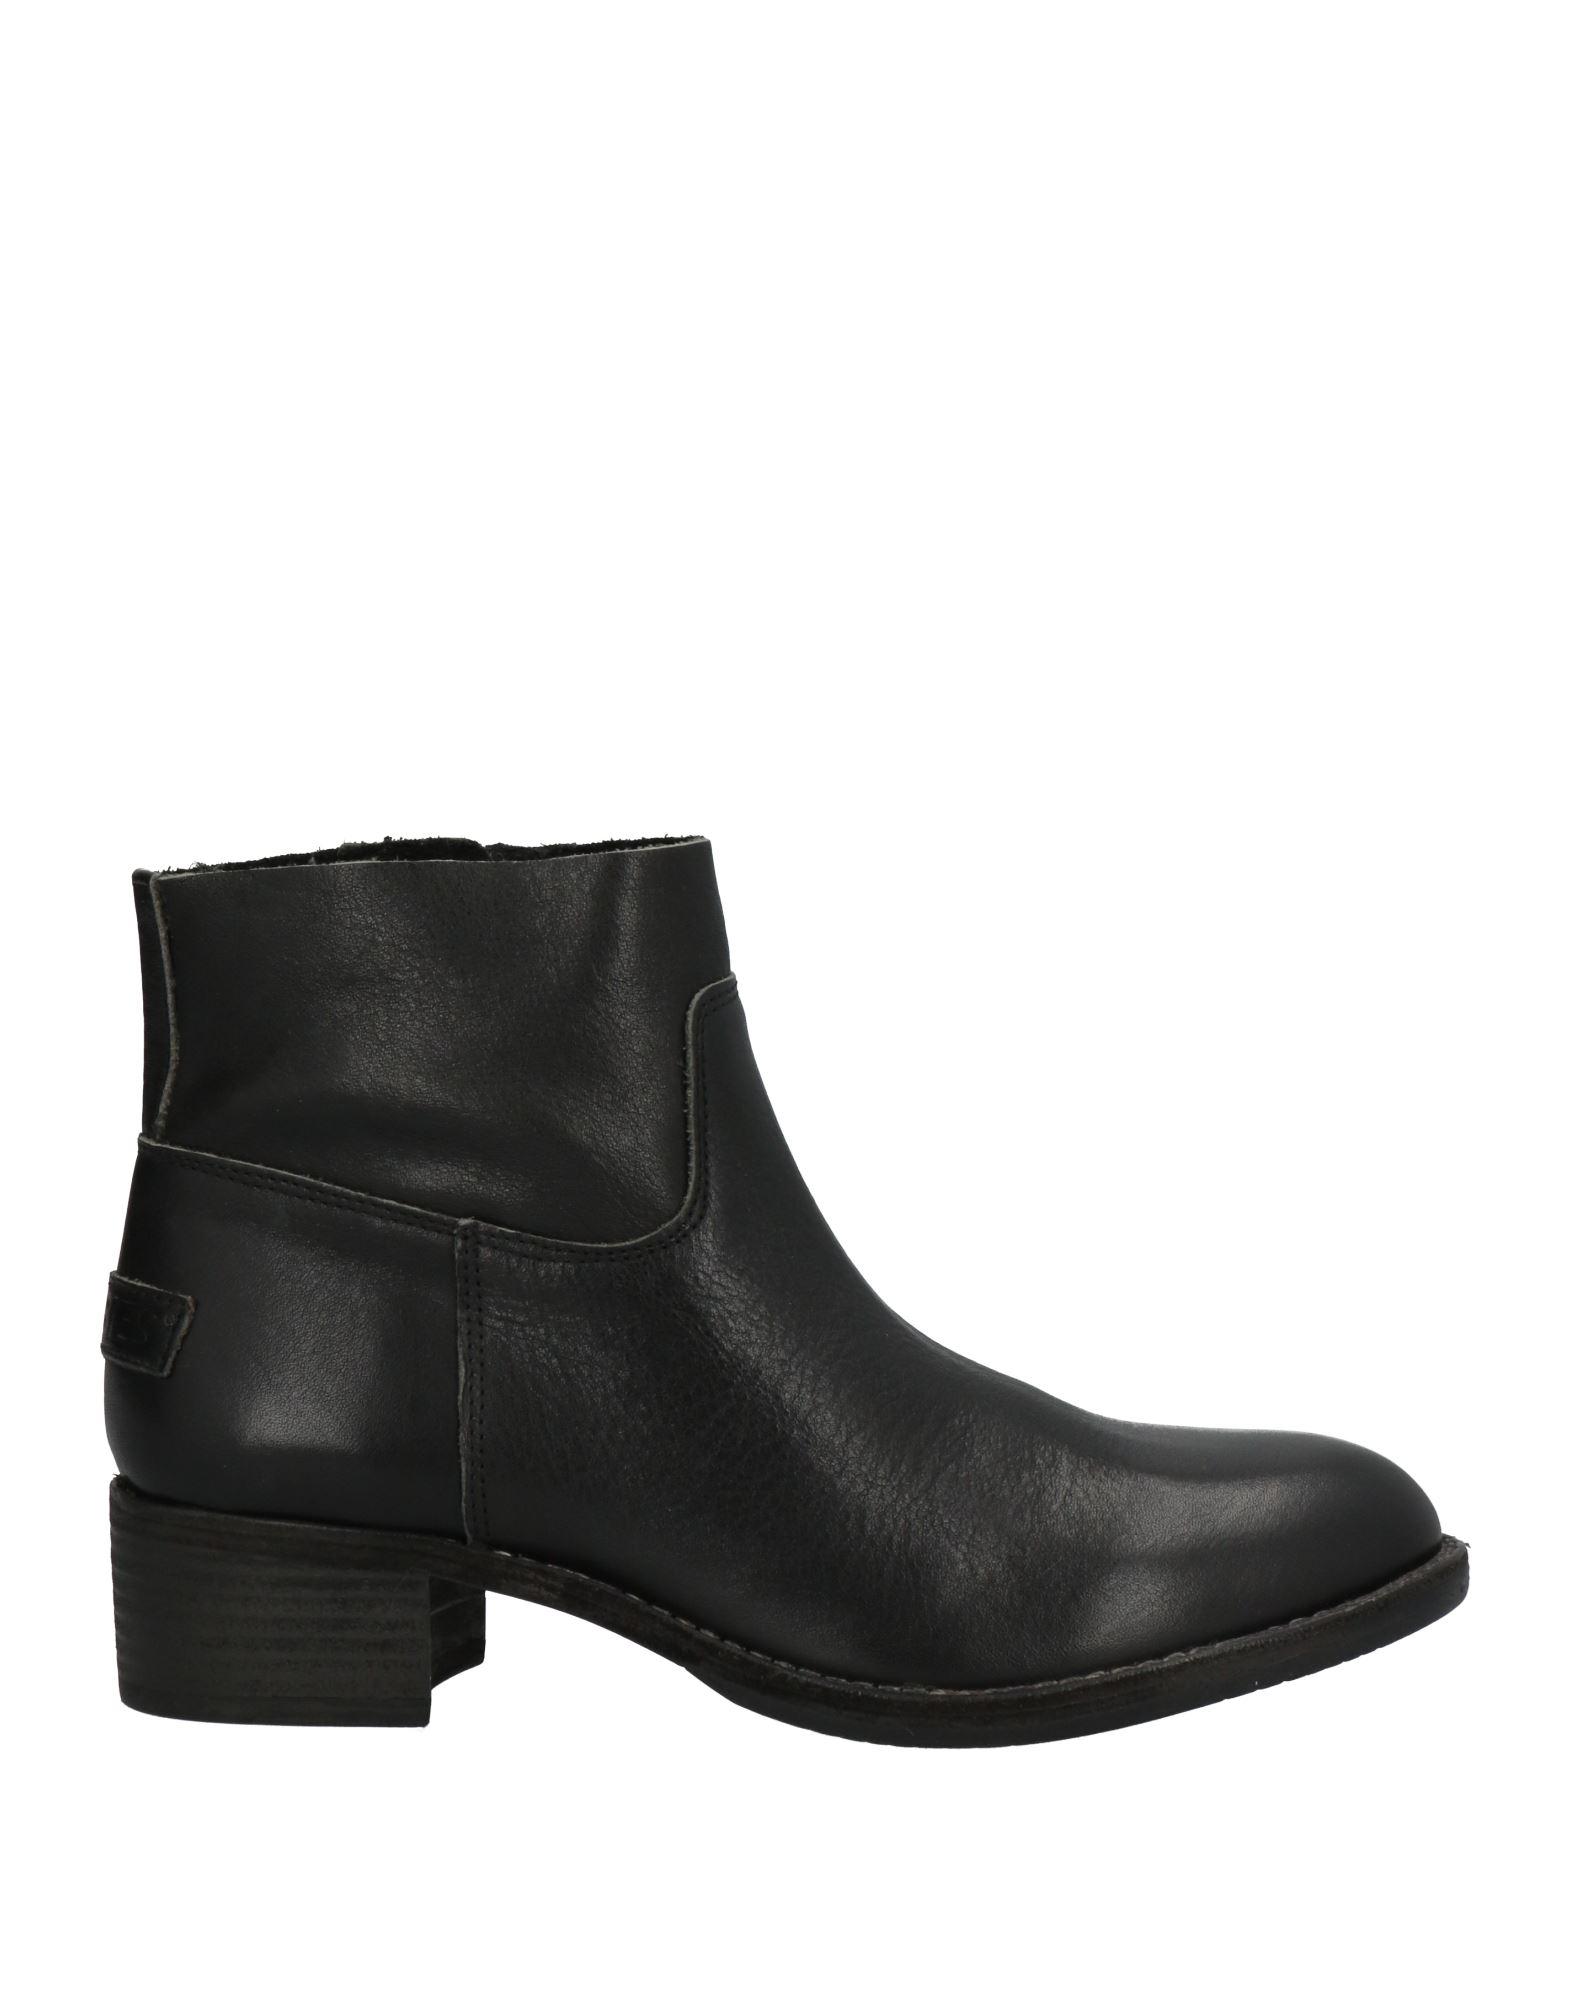 Shabbies Amsterdam Ankle Boots in Black | Lyst